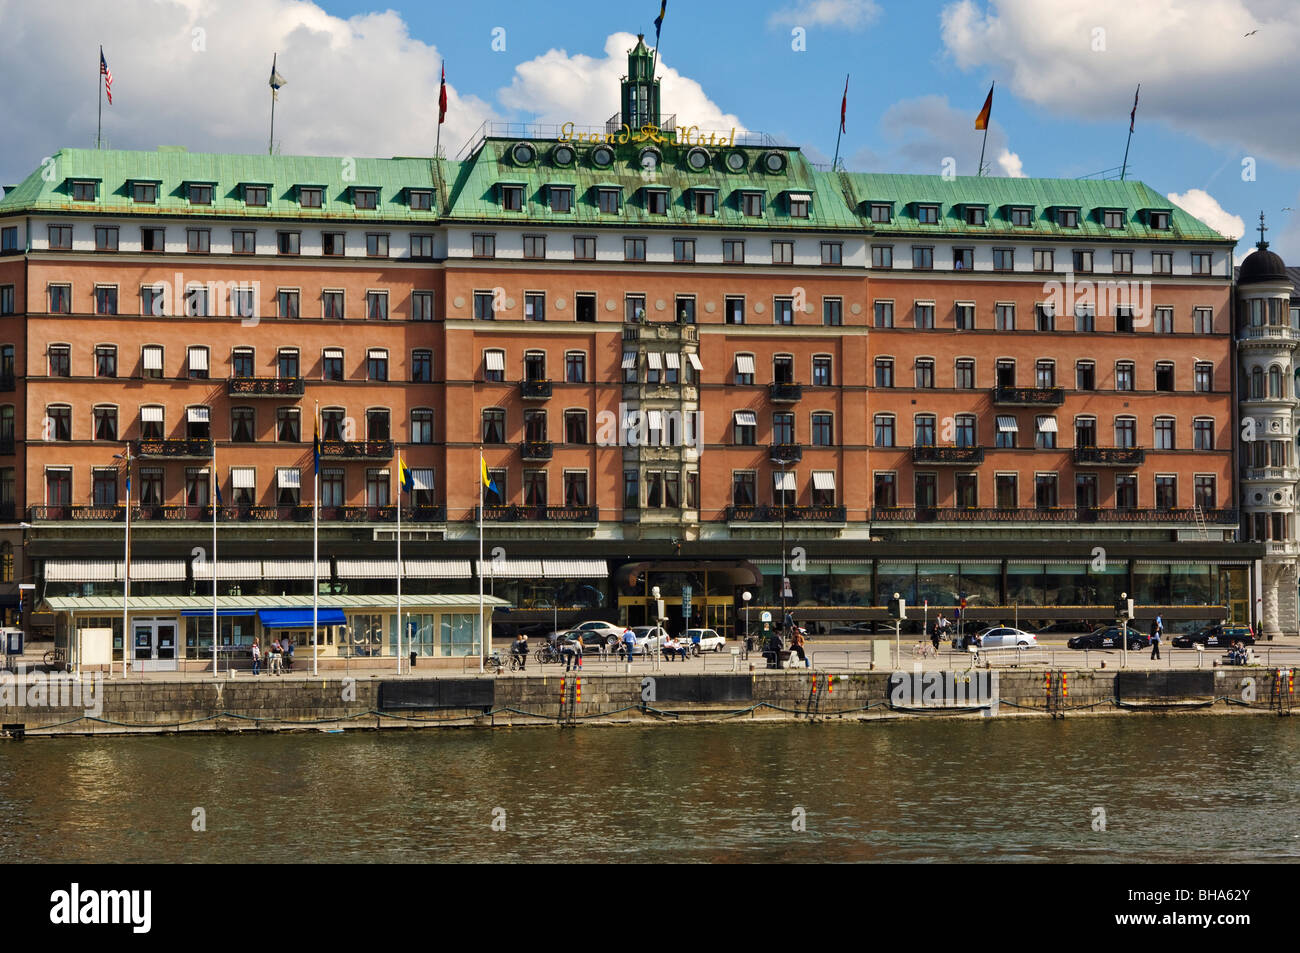 The Grand Hotel, Stockholm Sweden, closely associated with the Nobel Prizes. Prizewinners still stay here. Stock Photo